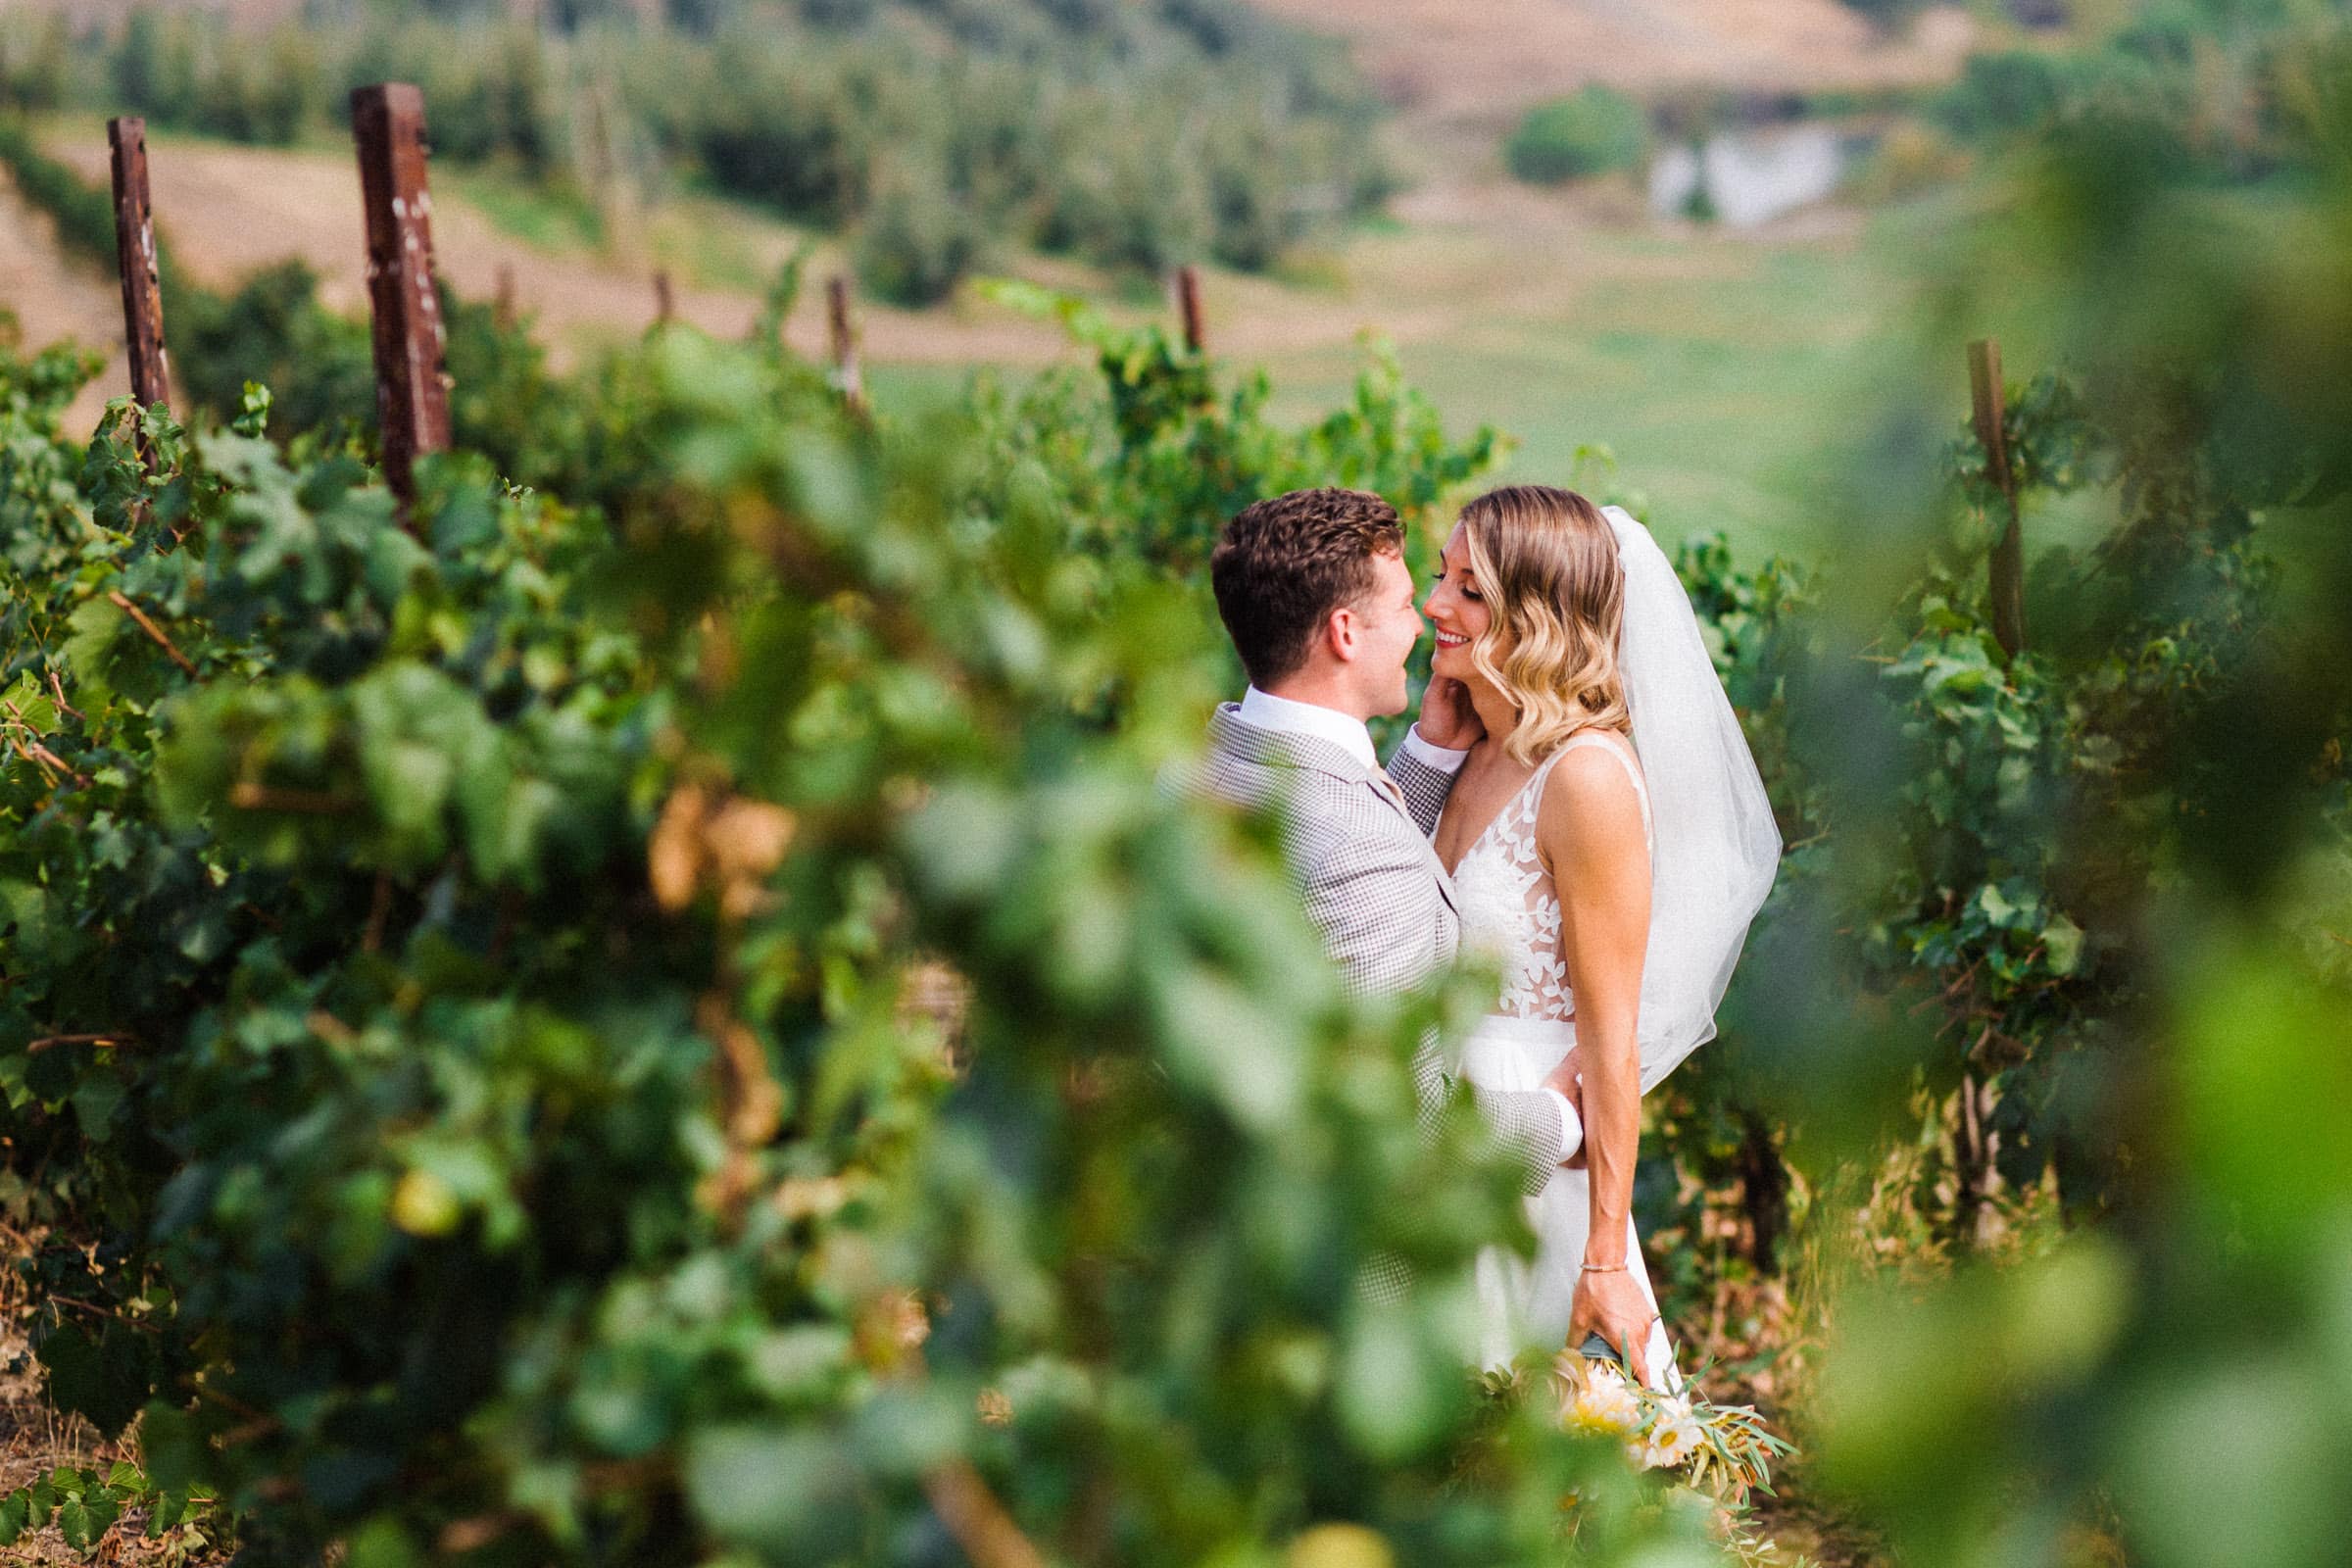 married couple smiling at each other between the vines in a vineyard